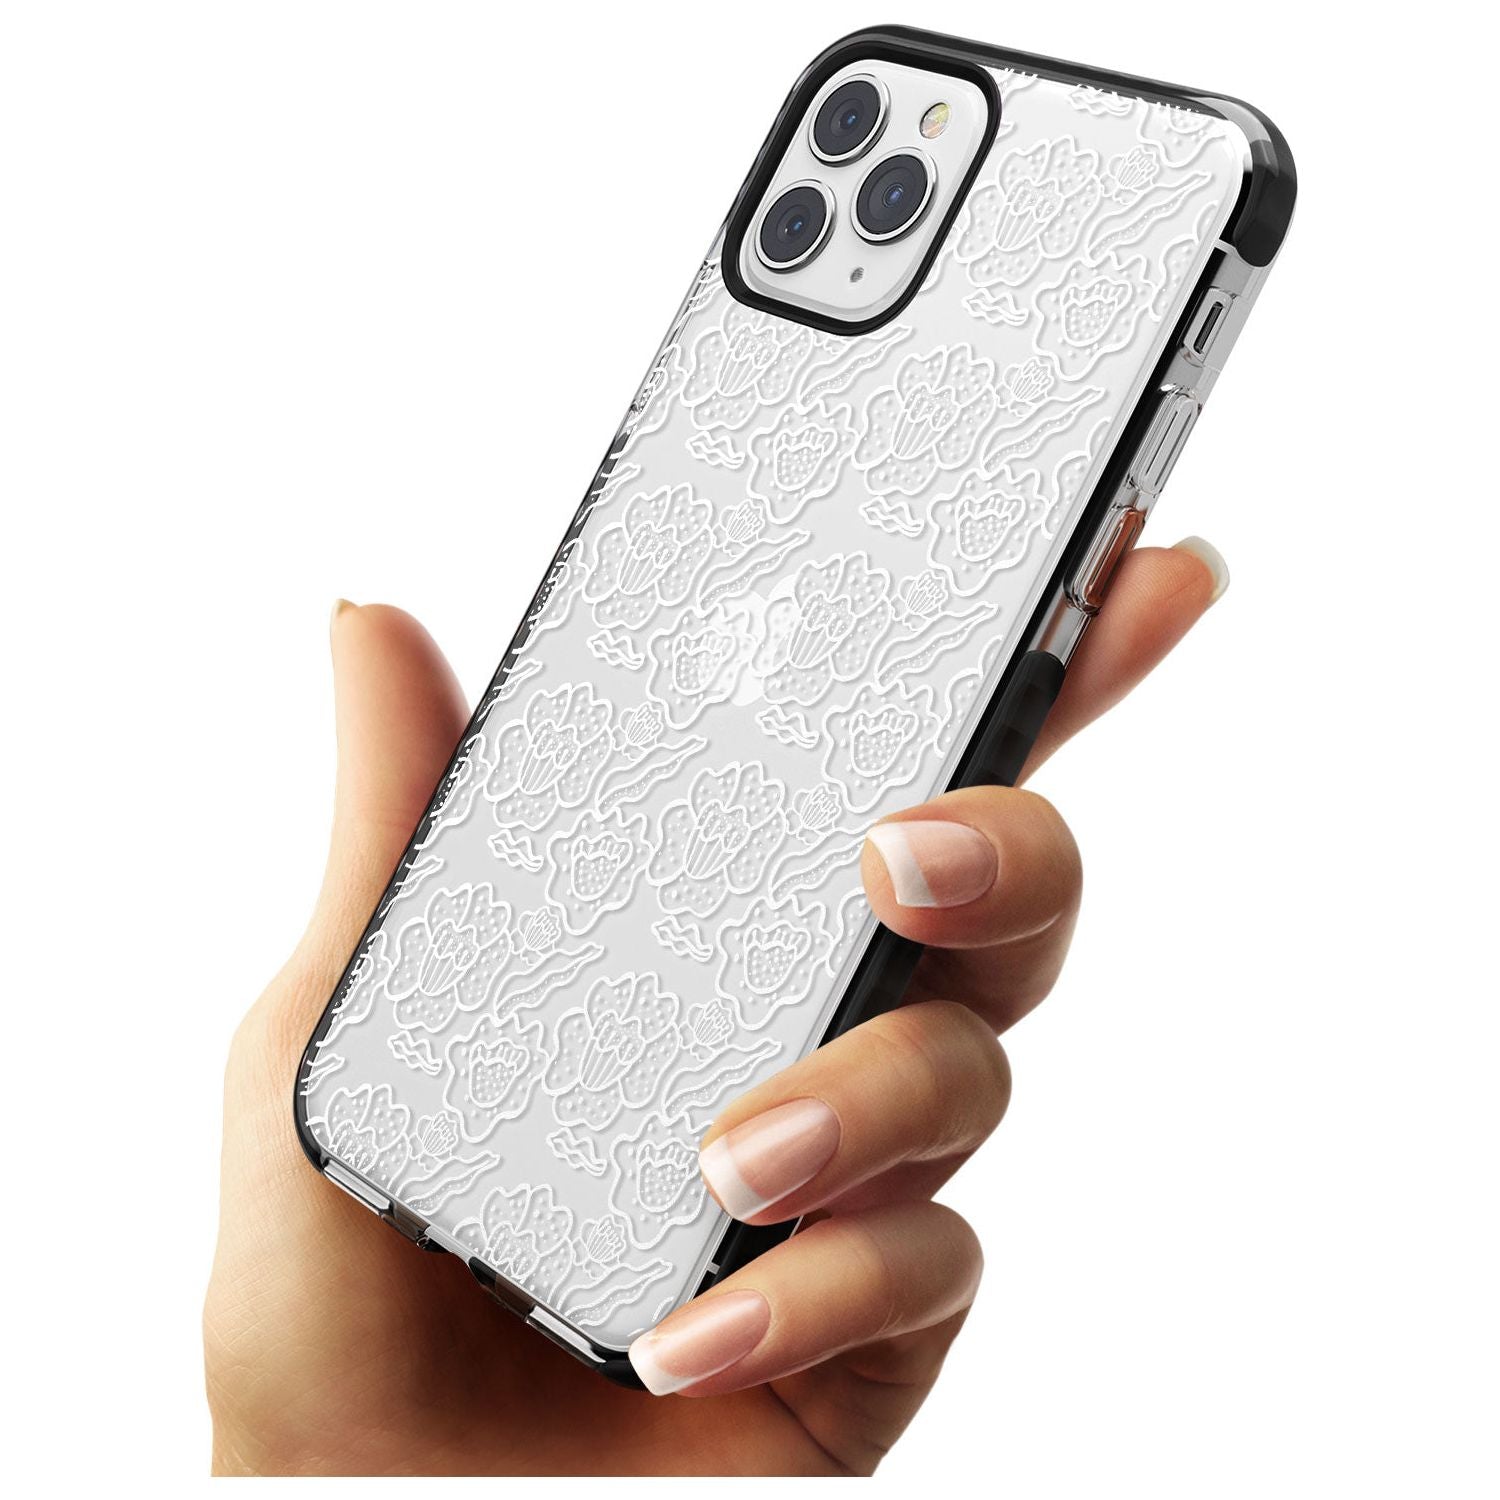 Funky Floral Patterns White on Clear Black Impact Phone Case for iPhone 11 Pro Max